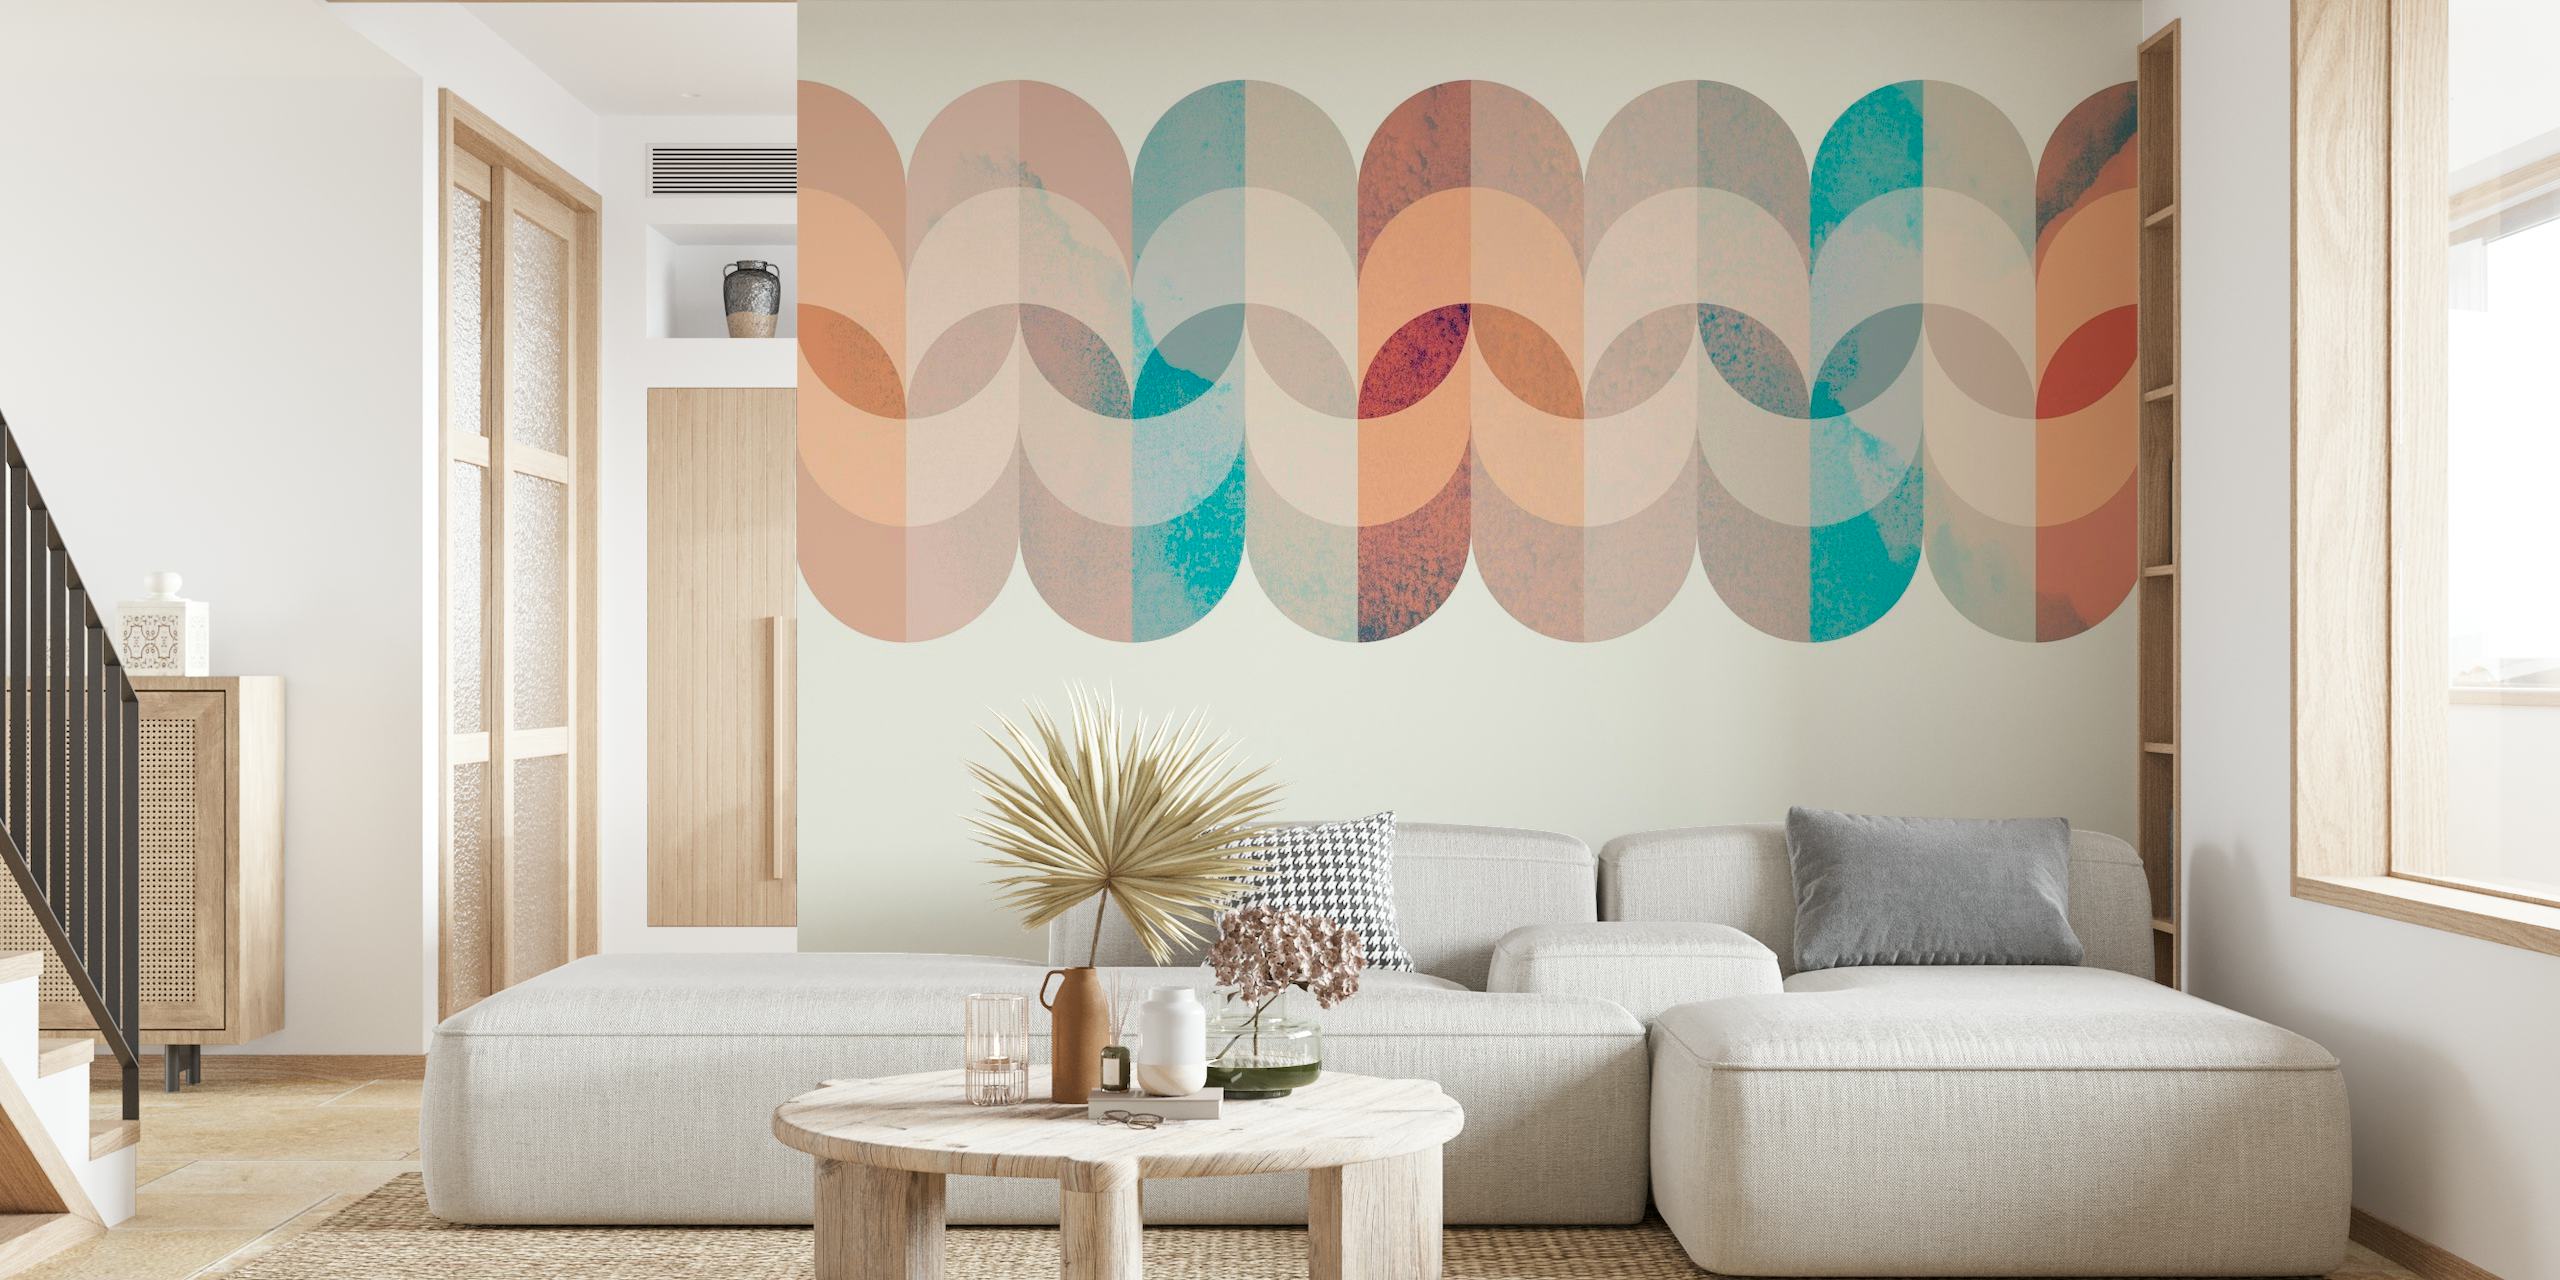 Abstract sea foam and mid century watercolor shapes wall mural